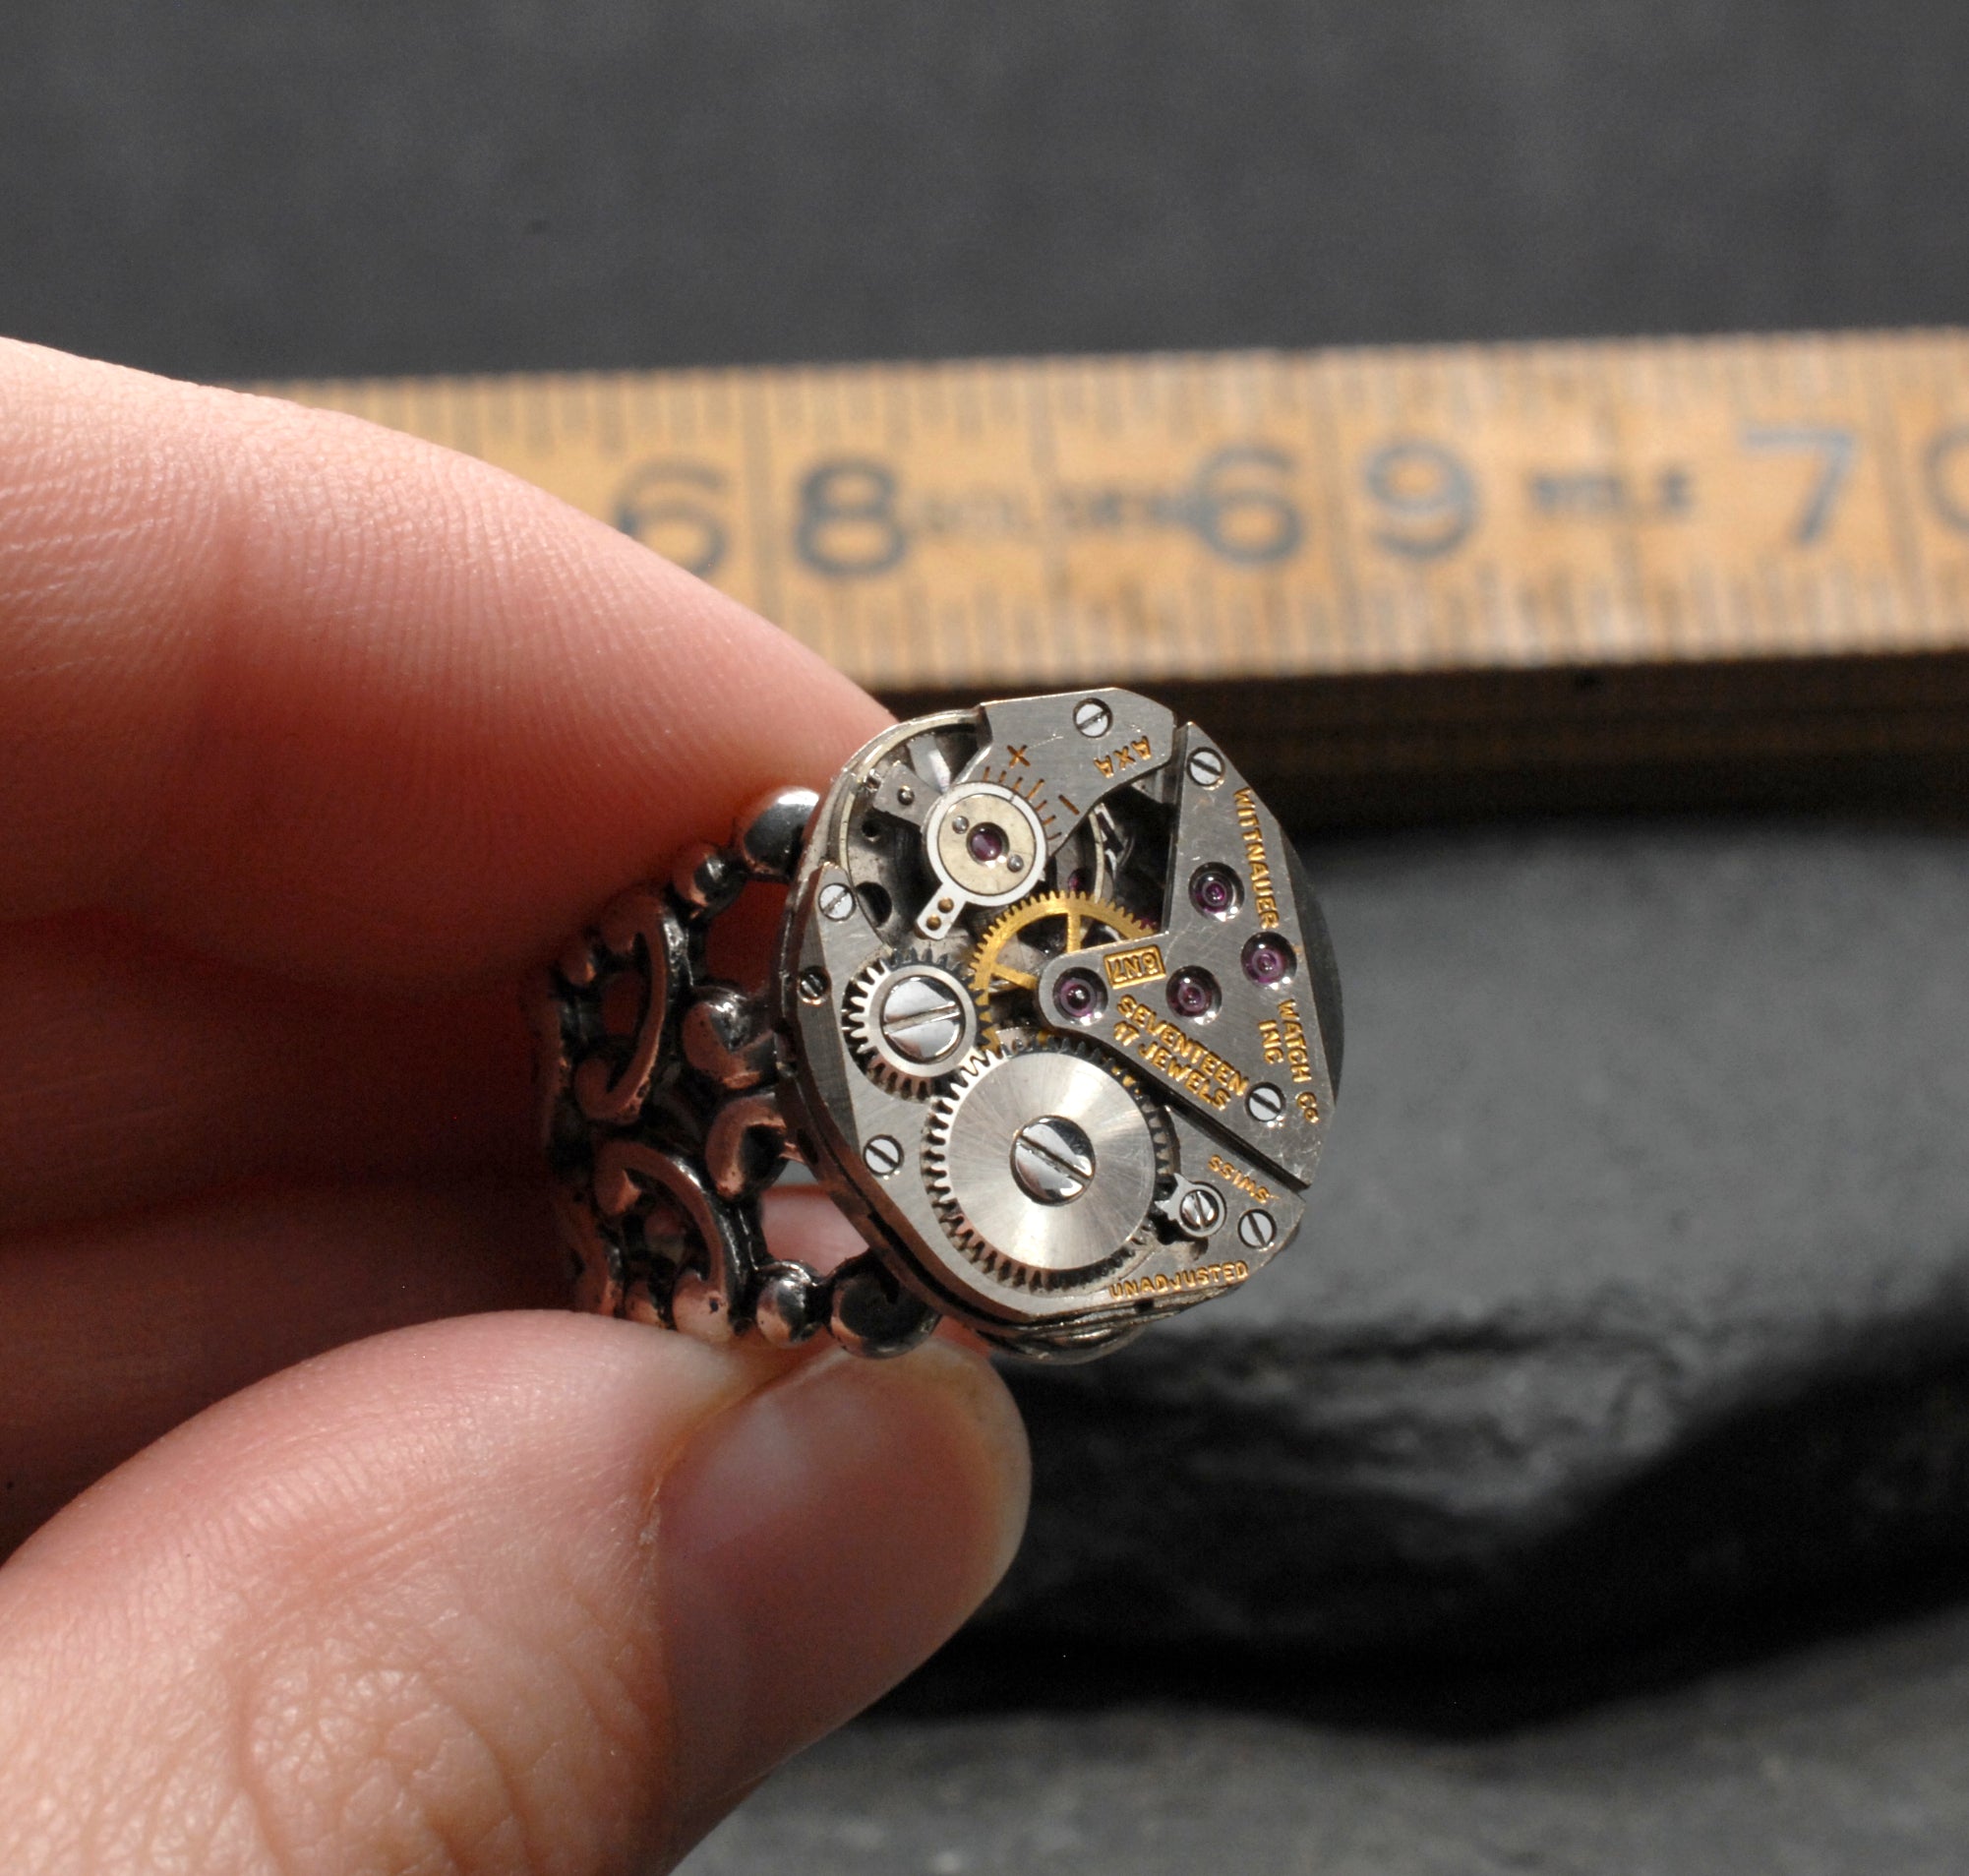 Personalized Steam Punk Ring in Antique Brass, Customize Your Crystal Colors for This Industrial Steampunk Watch Ring Jewelry Leave A Note with Color(